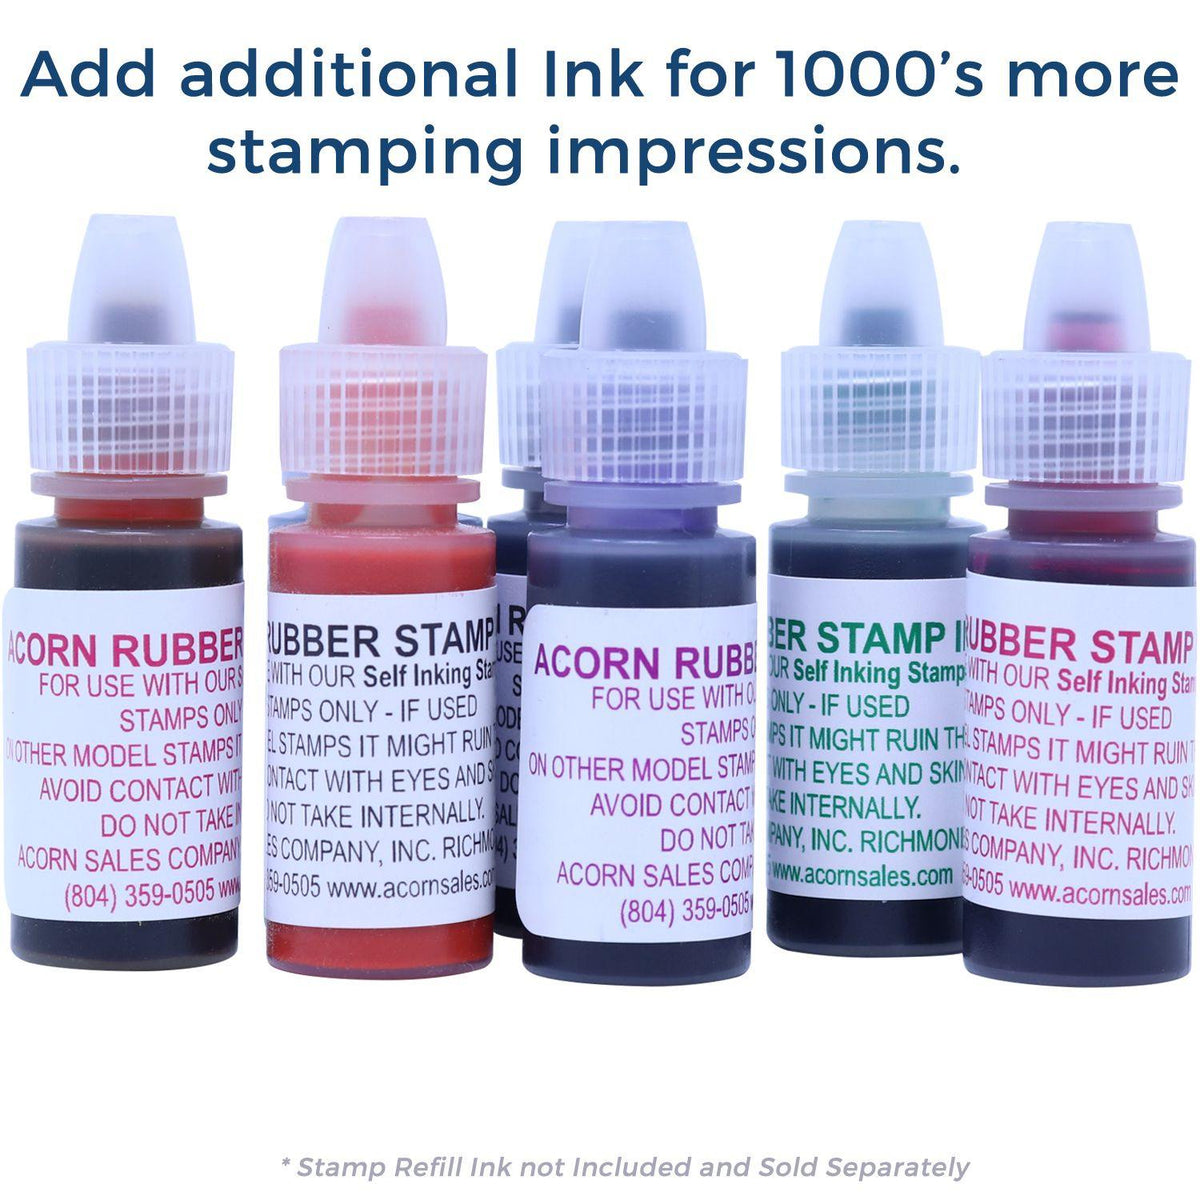 Slim Pre-Inked Attorneys&#39; Copy Stamp - Engineer Seal Stamps - Brand_Slim, Impression Size_Small, Stamp Type_Pre-Inked Stamp, Type of Use_Legal, Type of Use_Office